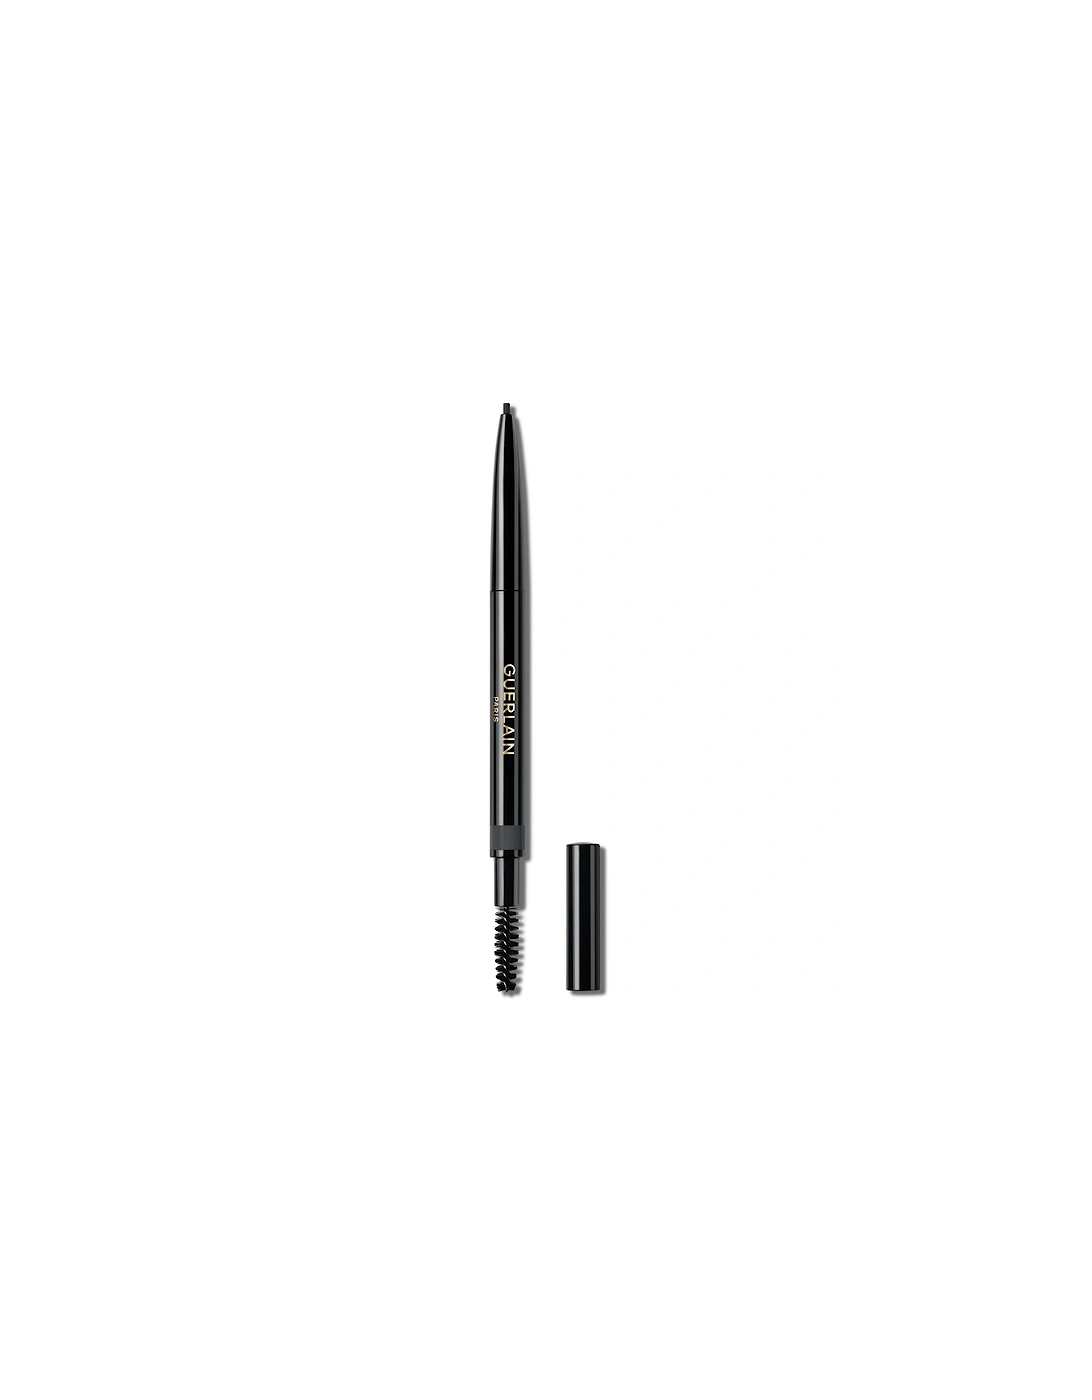 Brow G High Precision and Long Wear Brow Pencil - 05 Granite, 2 of 1